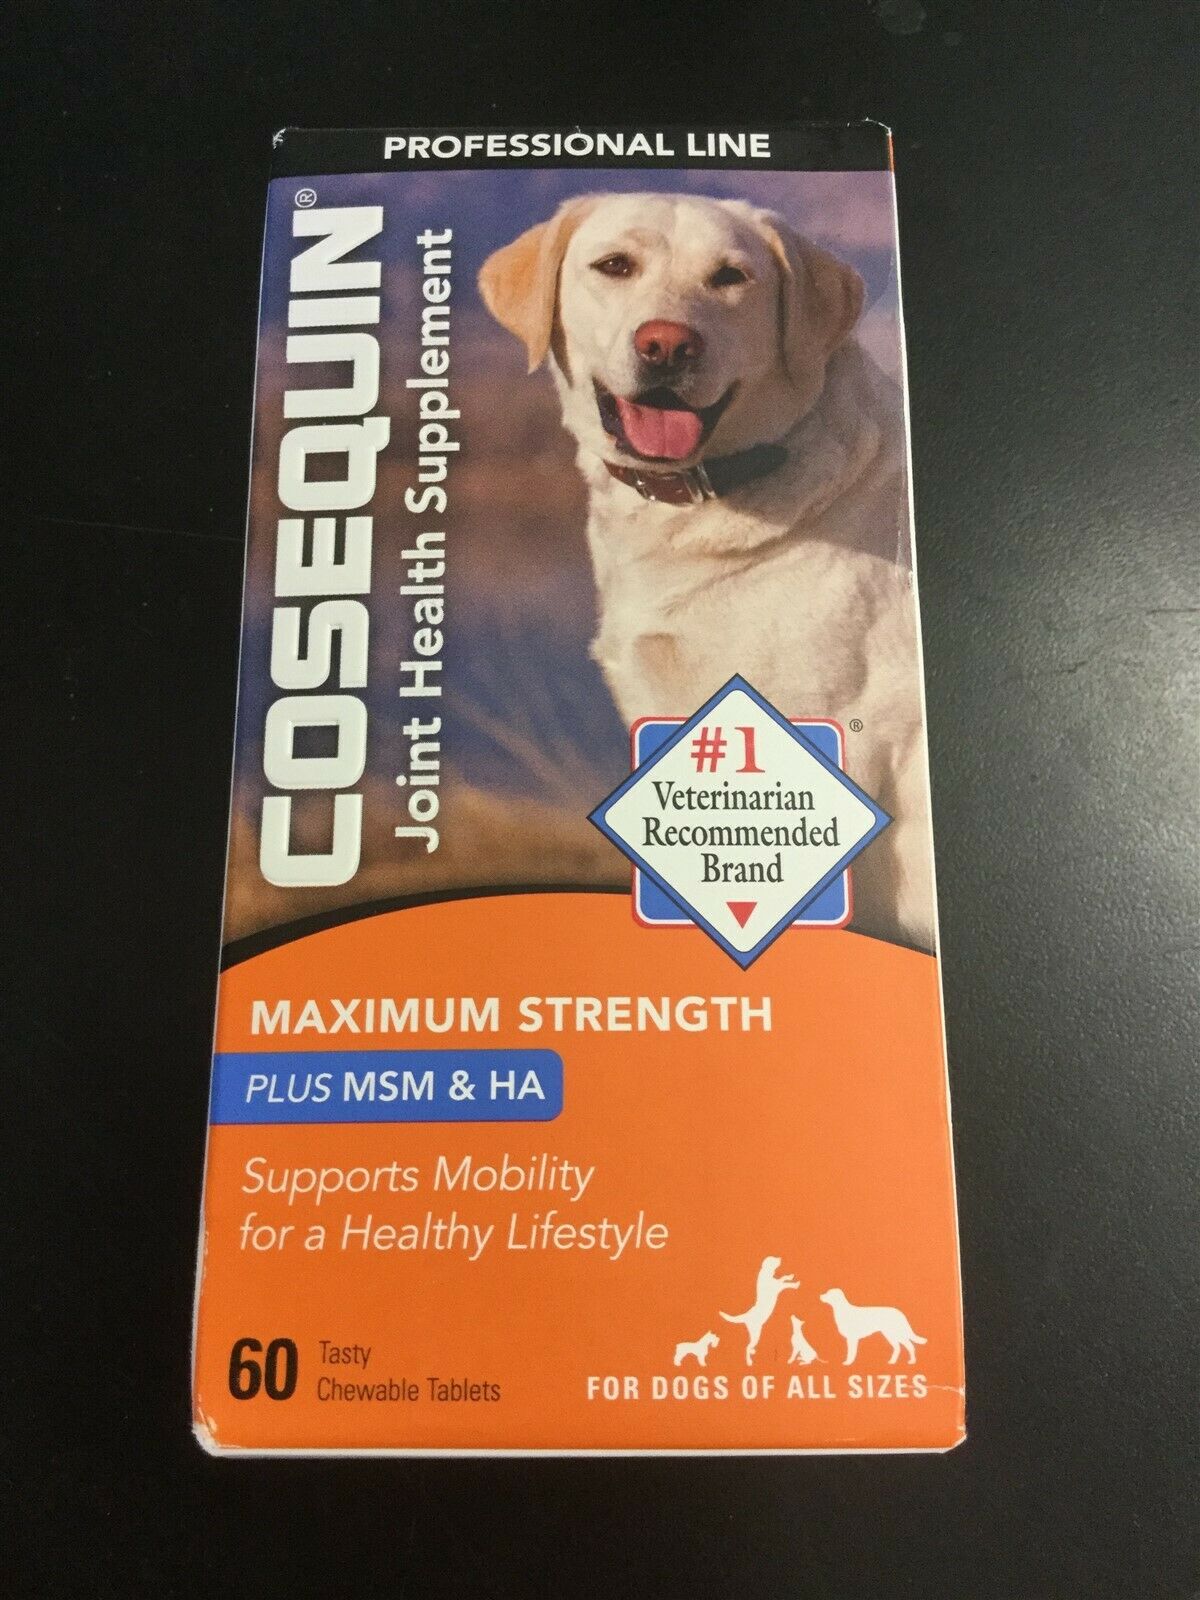 Cosequin Ds Plus Msm For Dogs (60 Chewable Tablets) Nutramax Exp 1/2023+ # 7365